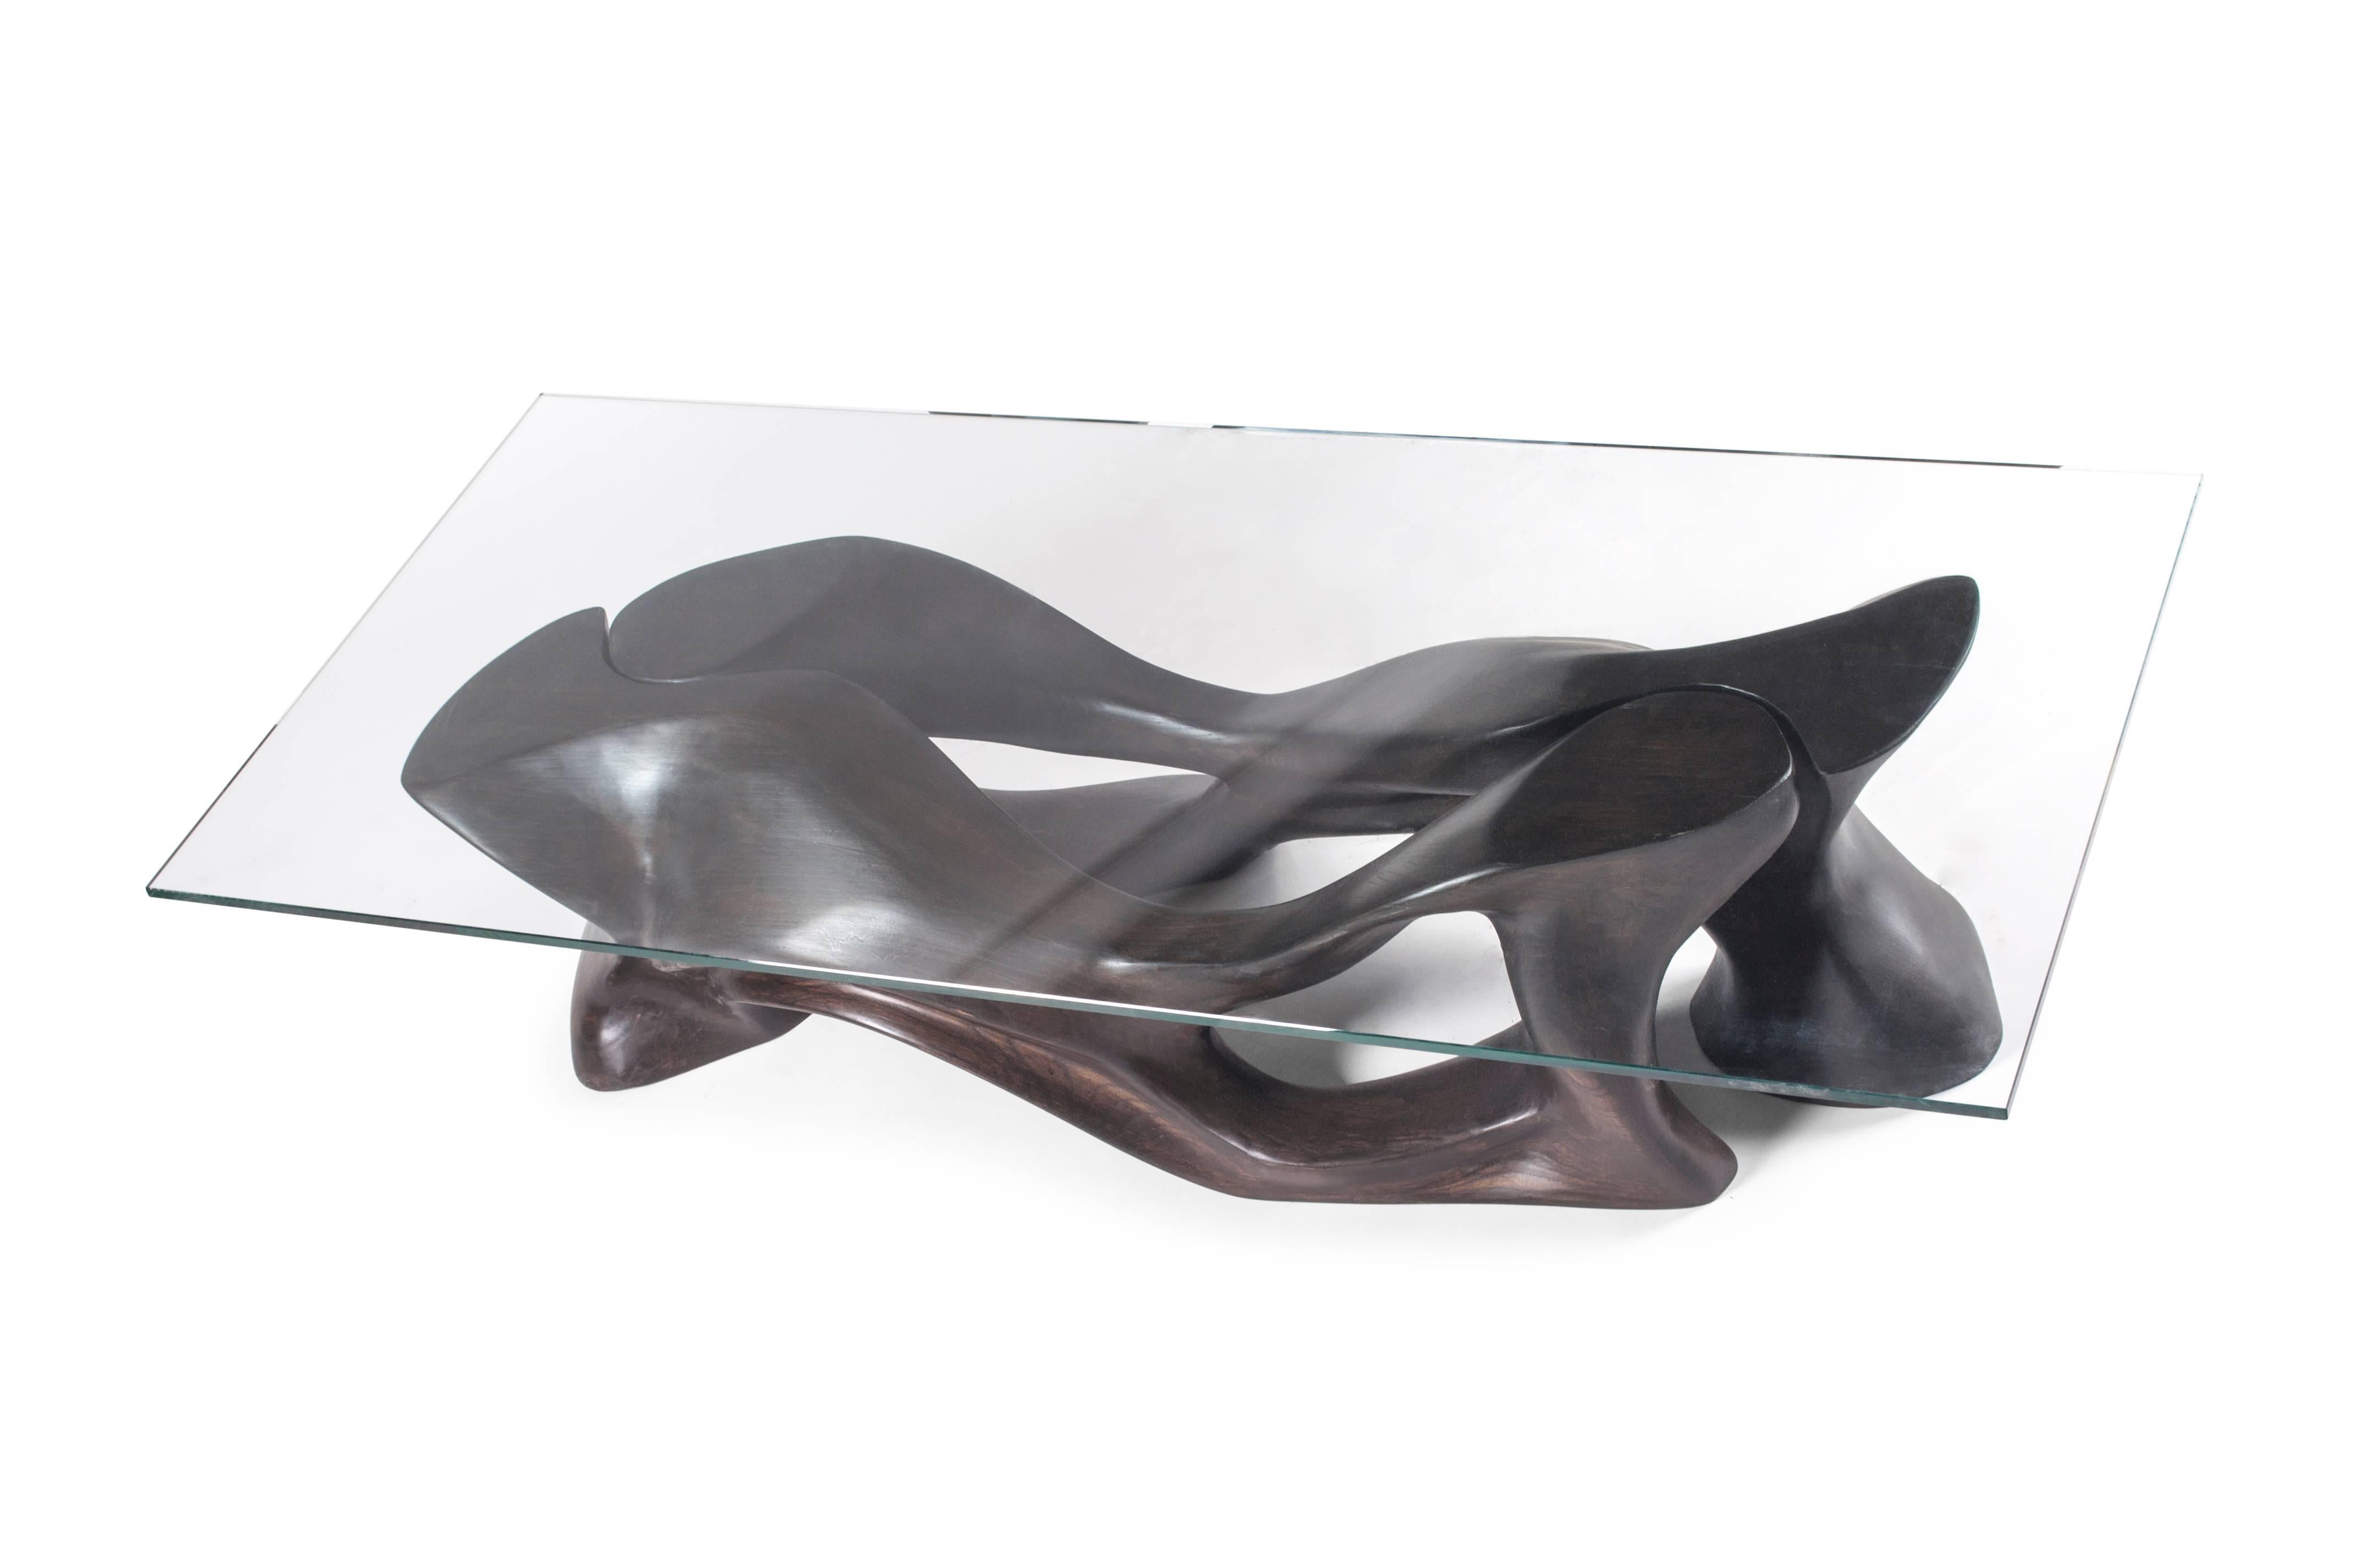 Glass Amorph Crux Modern Coffee Table, Ebony stain in Ash wood with rectangular glass  For Sale